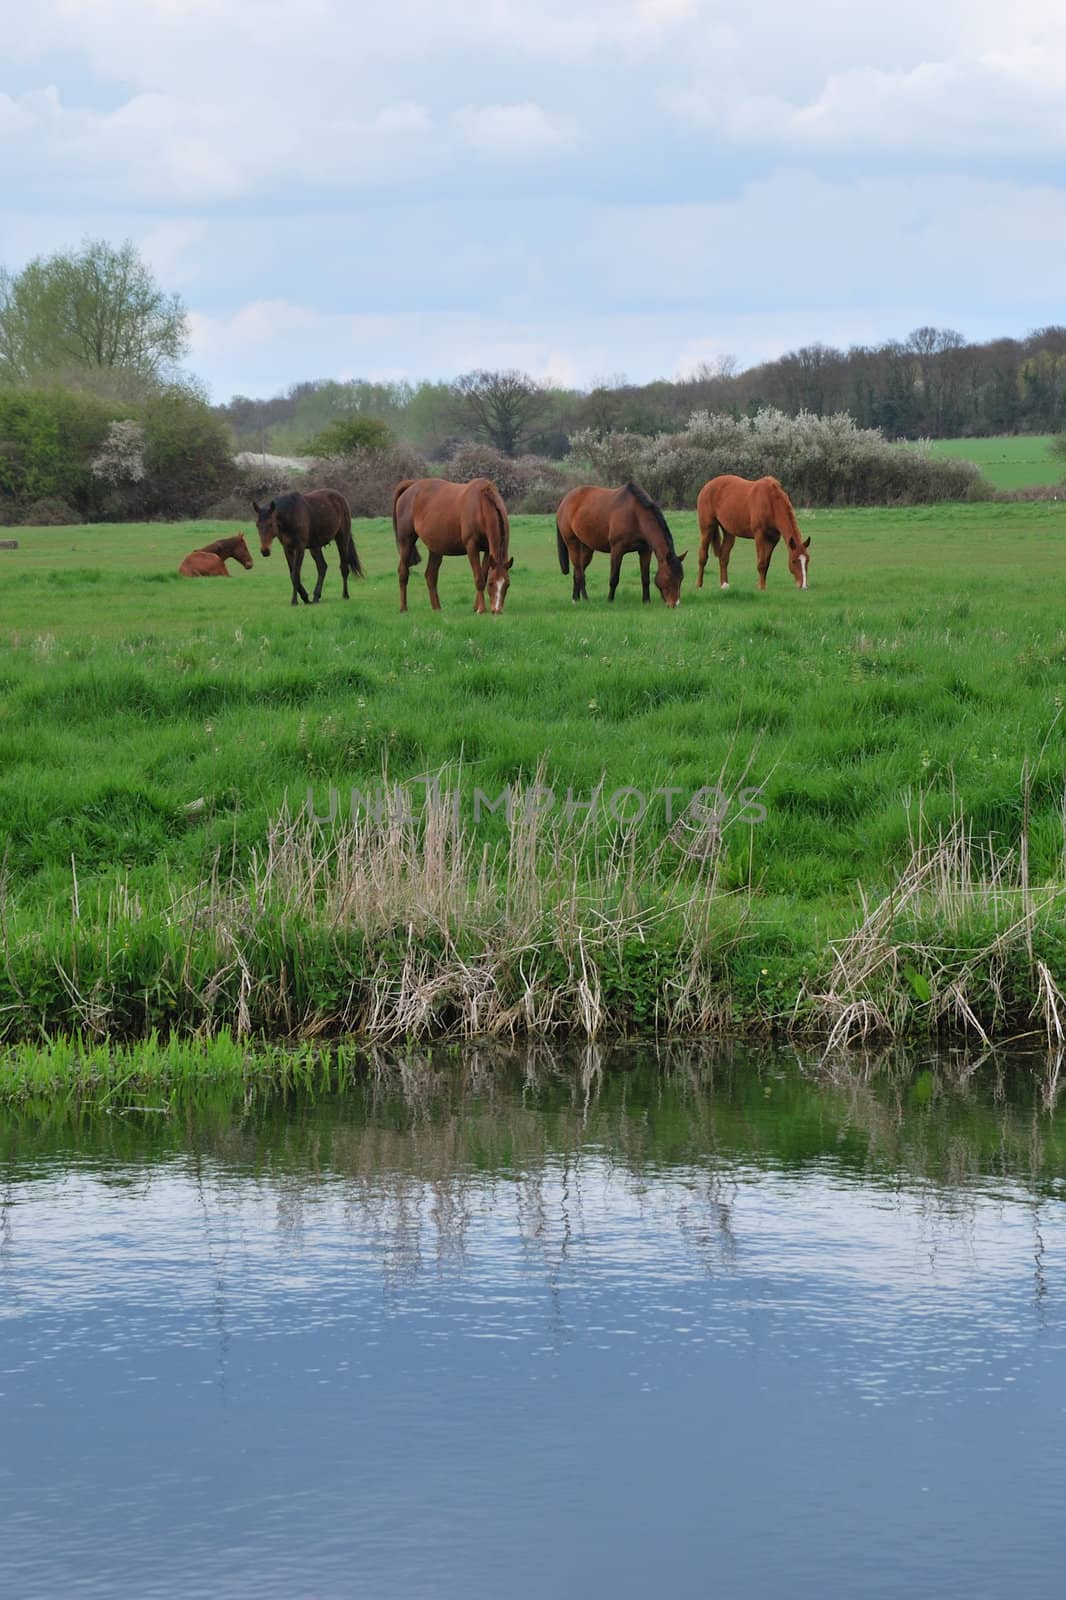 Horses in field with river in foreground